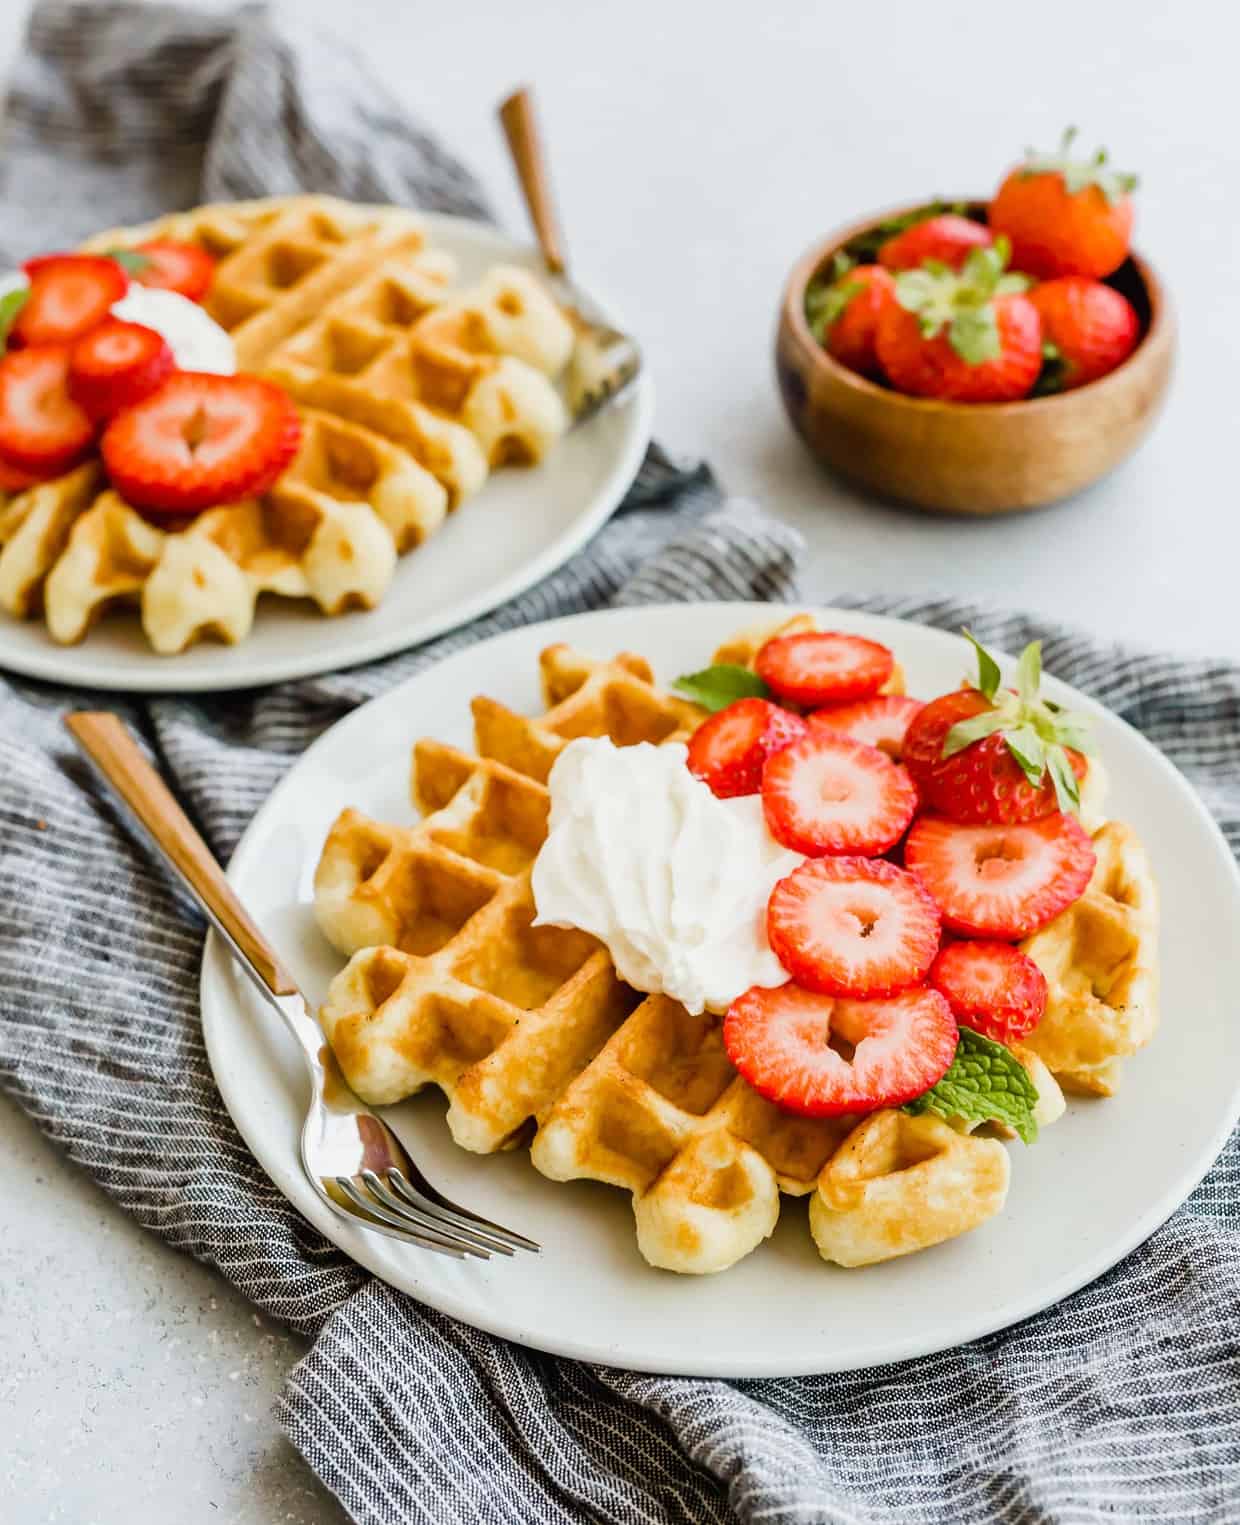 A buttermilk waffle with whipped cream and chopped strawberries on top.